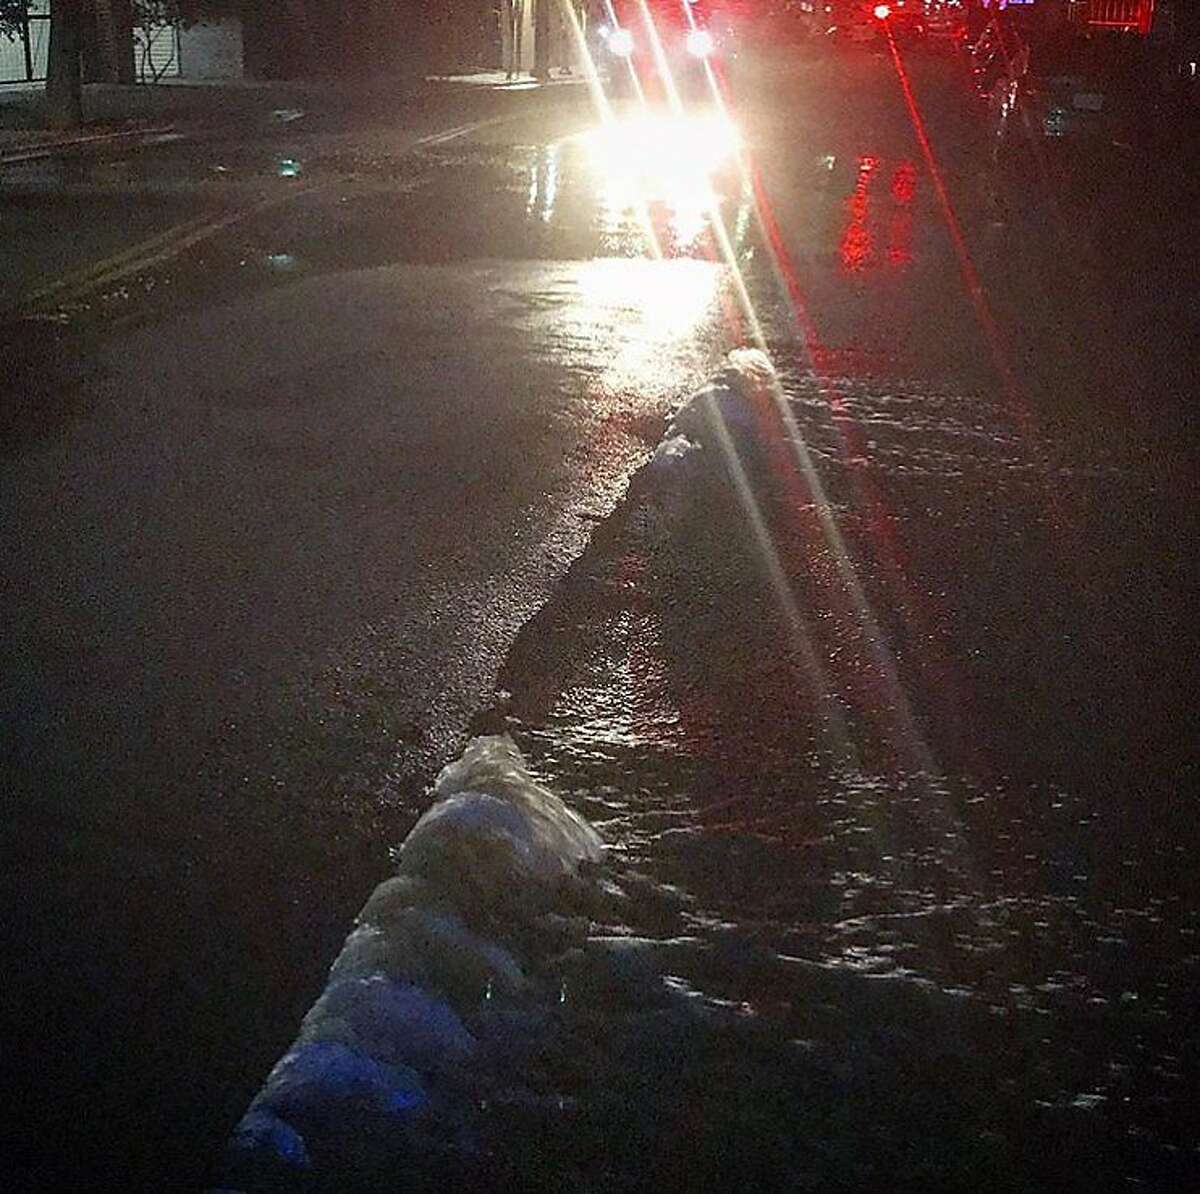 Emeryville police posted this photo of a water main break in their city.